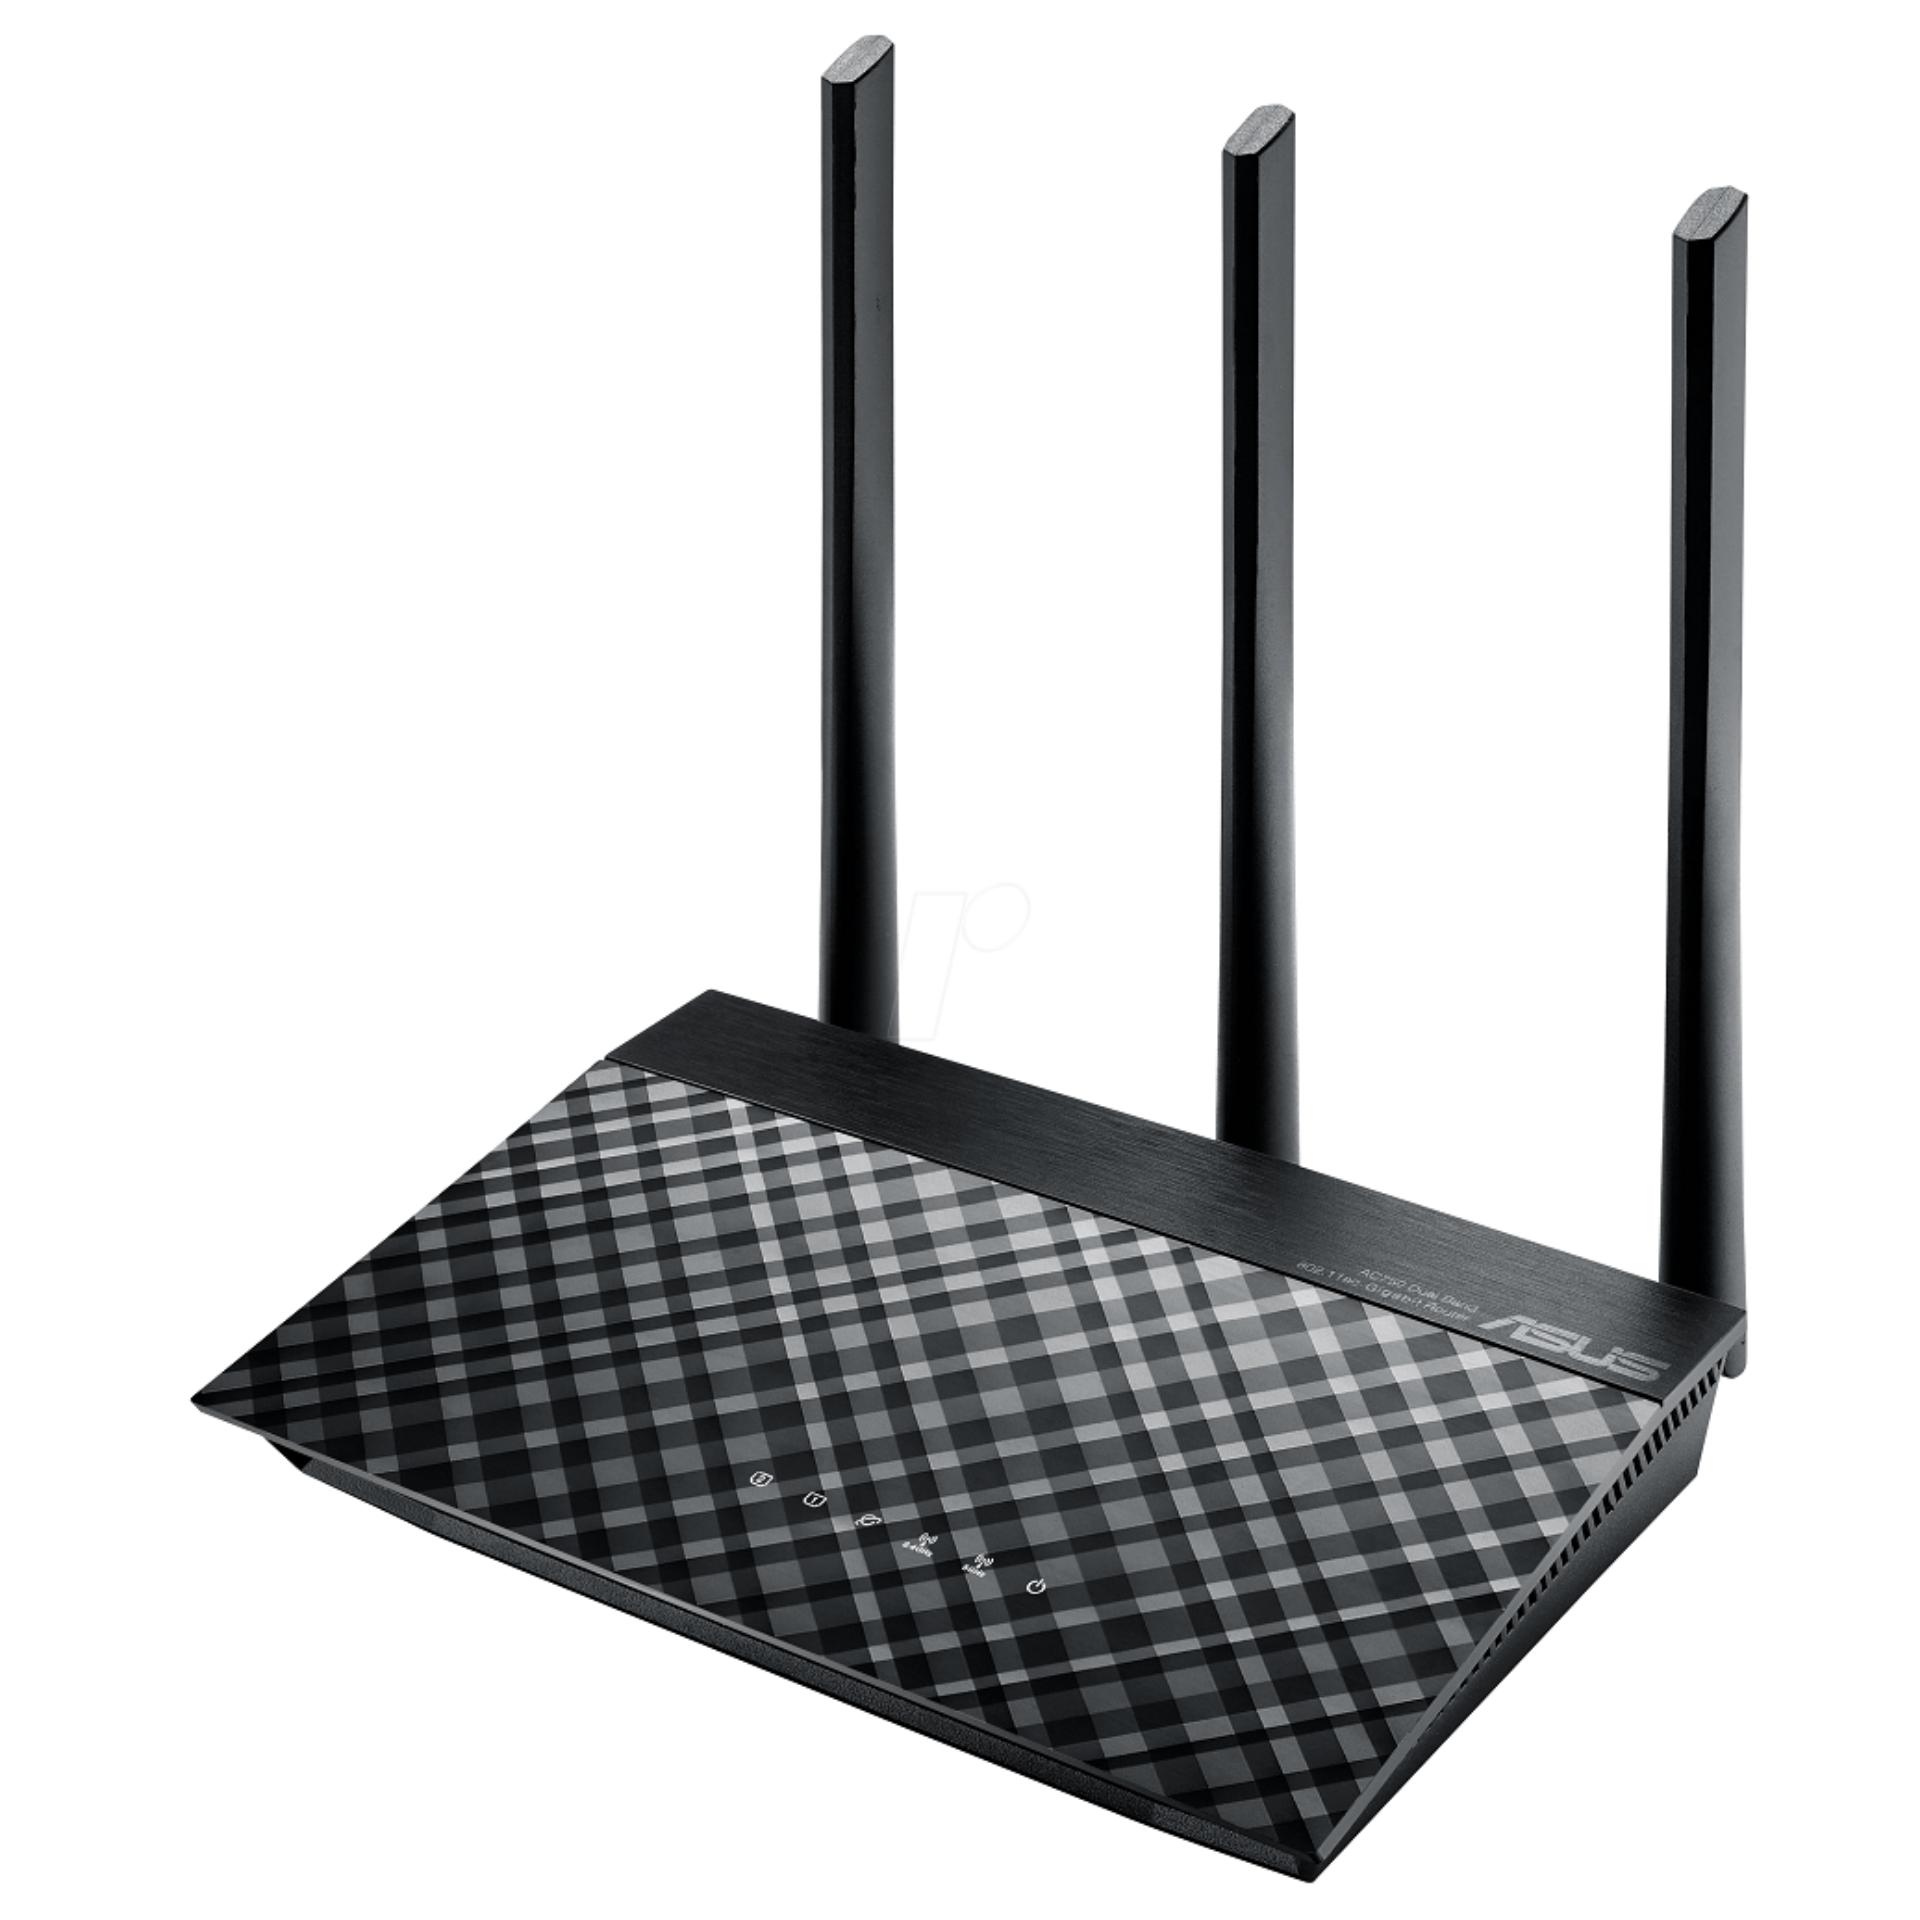 Bộ phát wifi Router ASUS RT-AC53